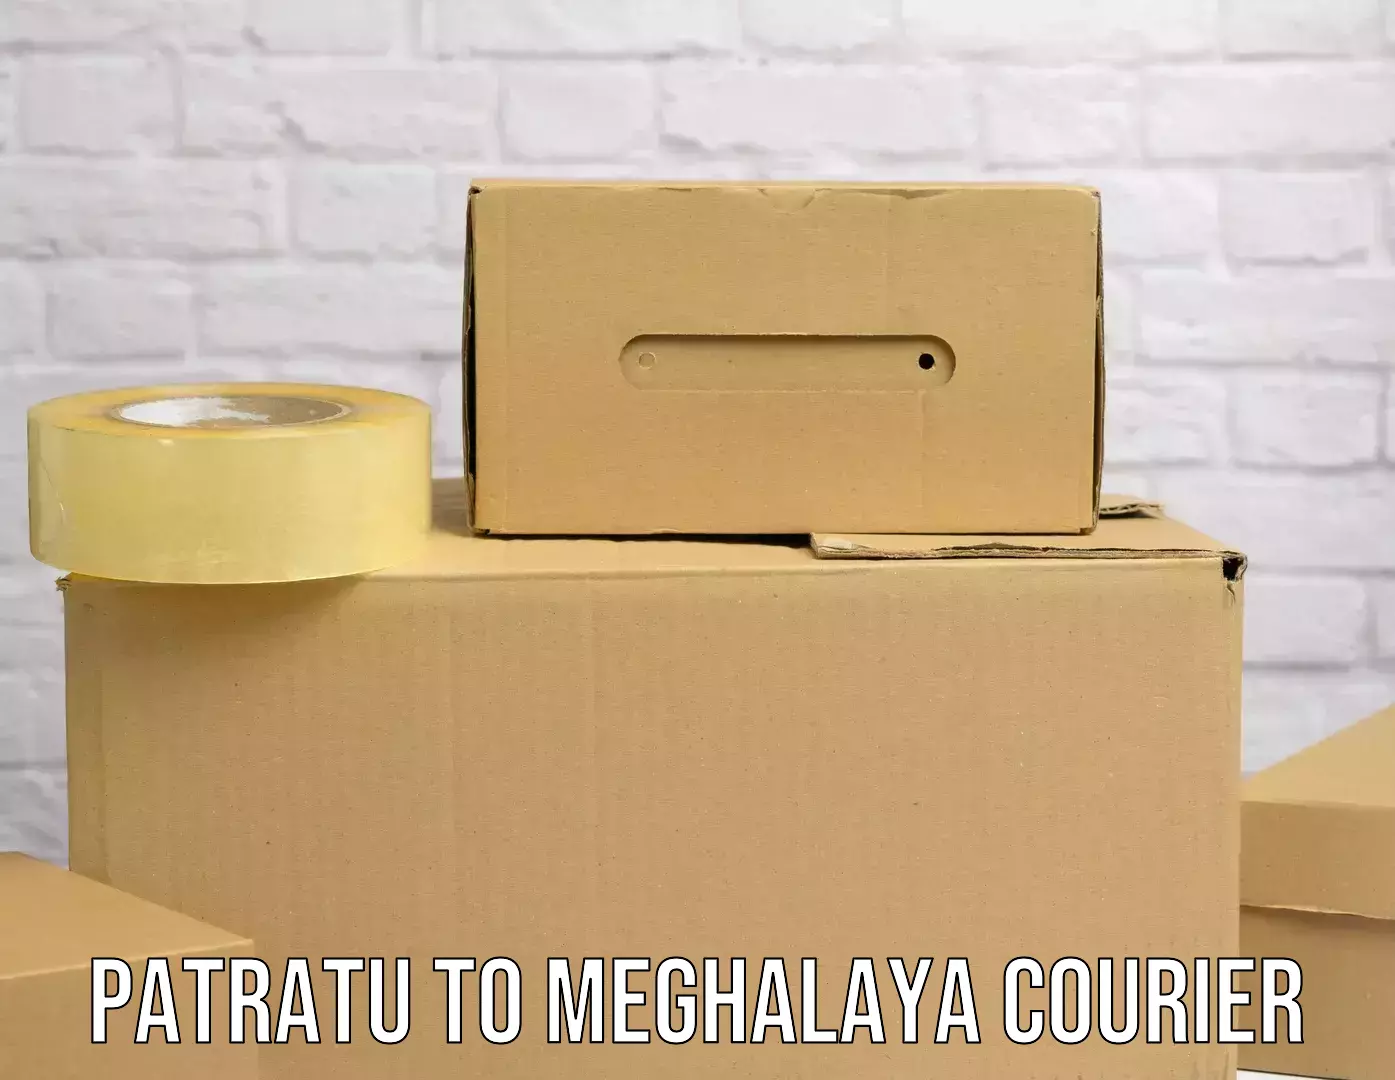 Courier service innovation Patratu to Marshillong